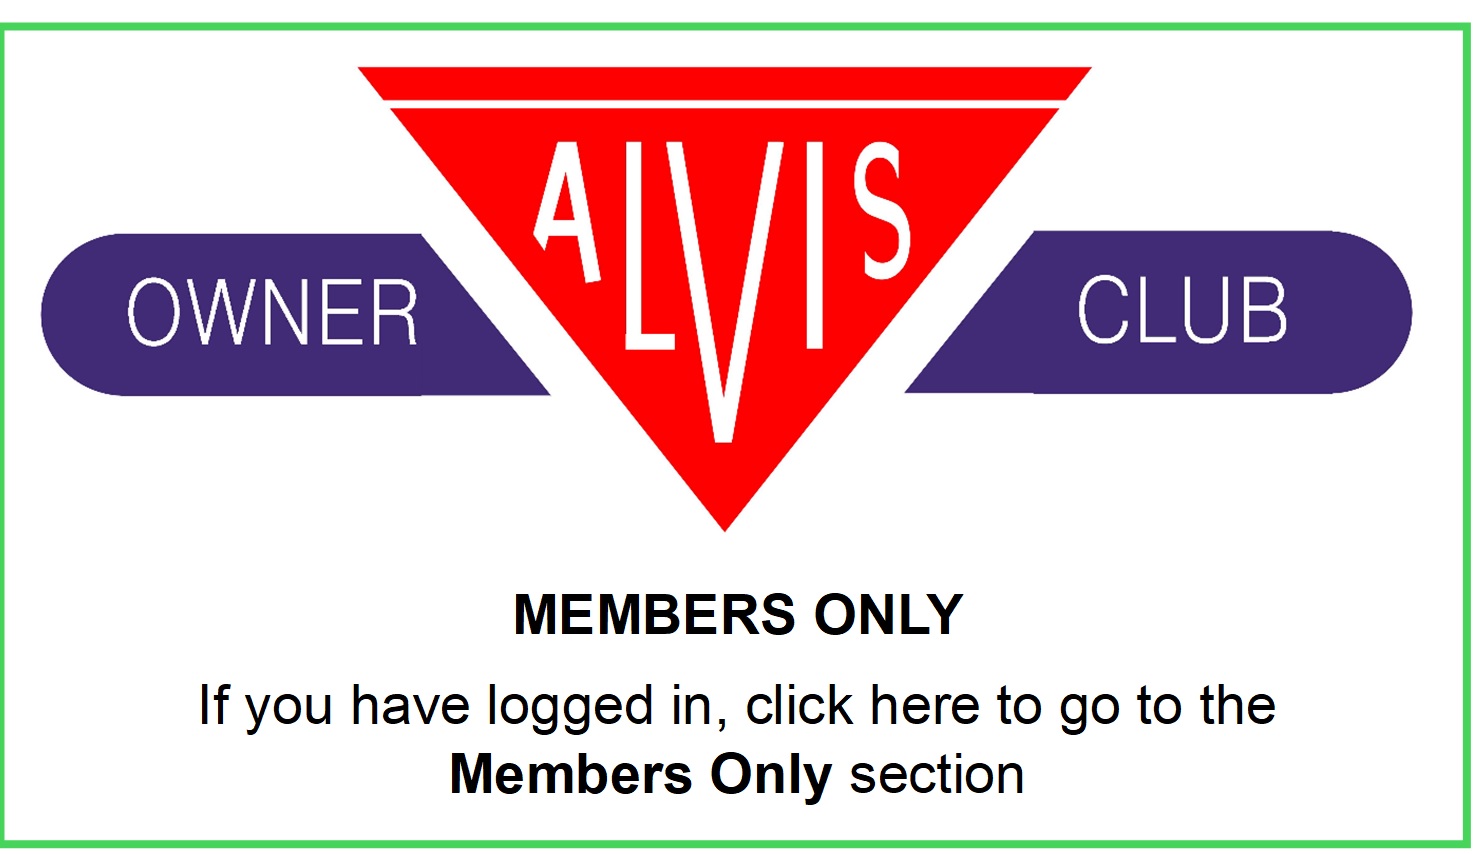 Members Only Section